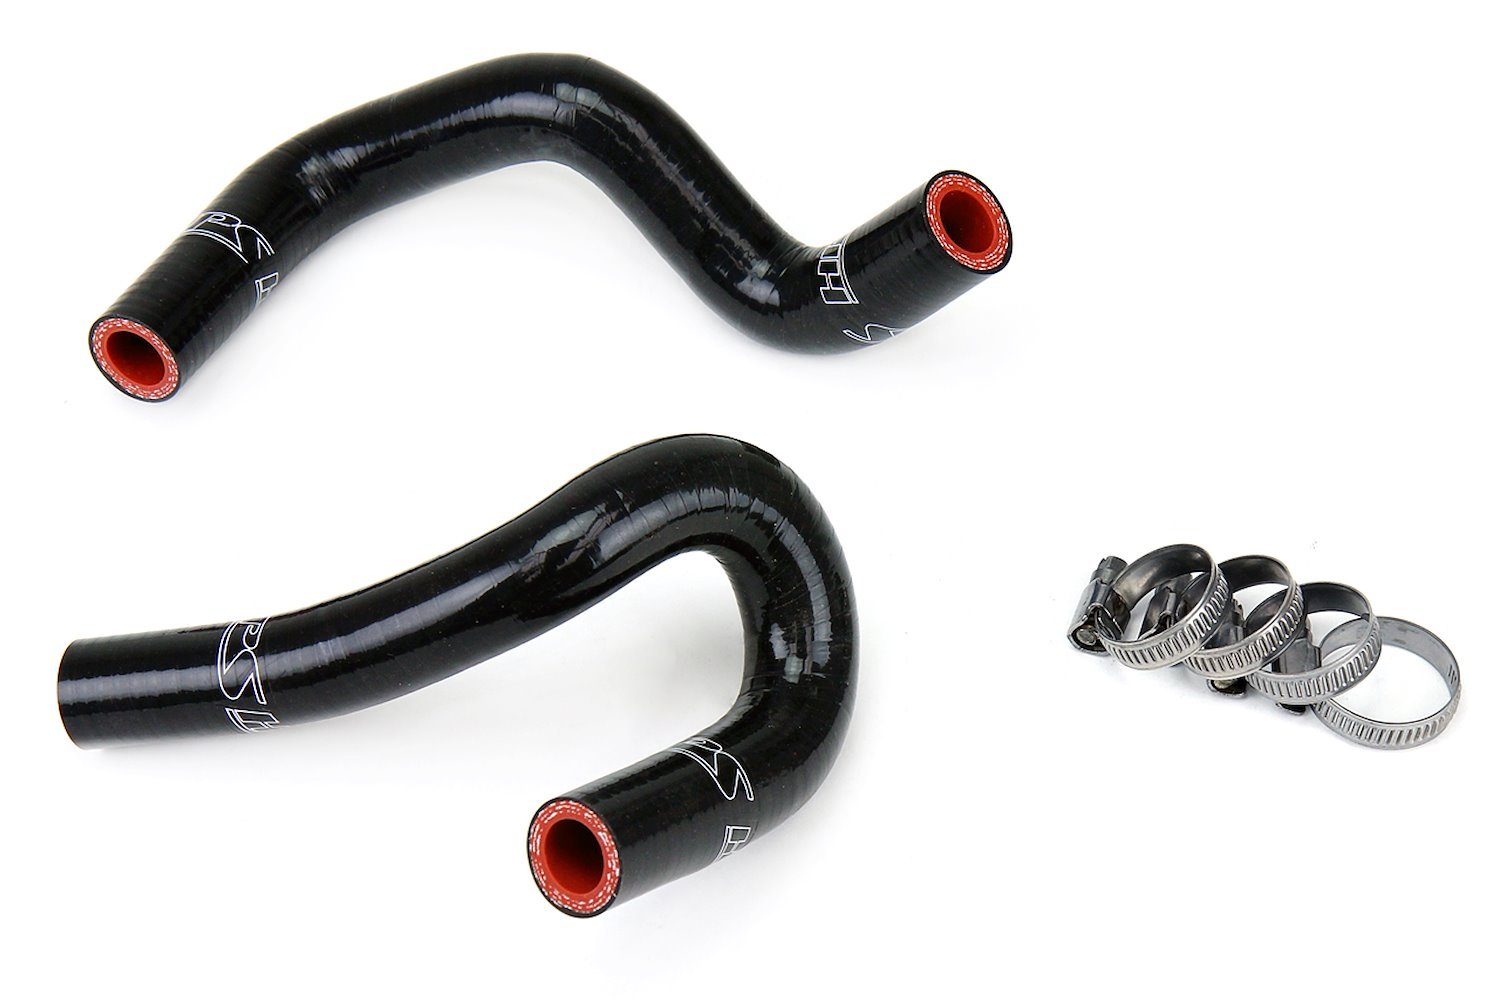 57-1309-BLK Heater Hose Kit, High-Temp 3-Ply Reinforced Silicone, Replace OEM Rubber Heater Coolant Hoses